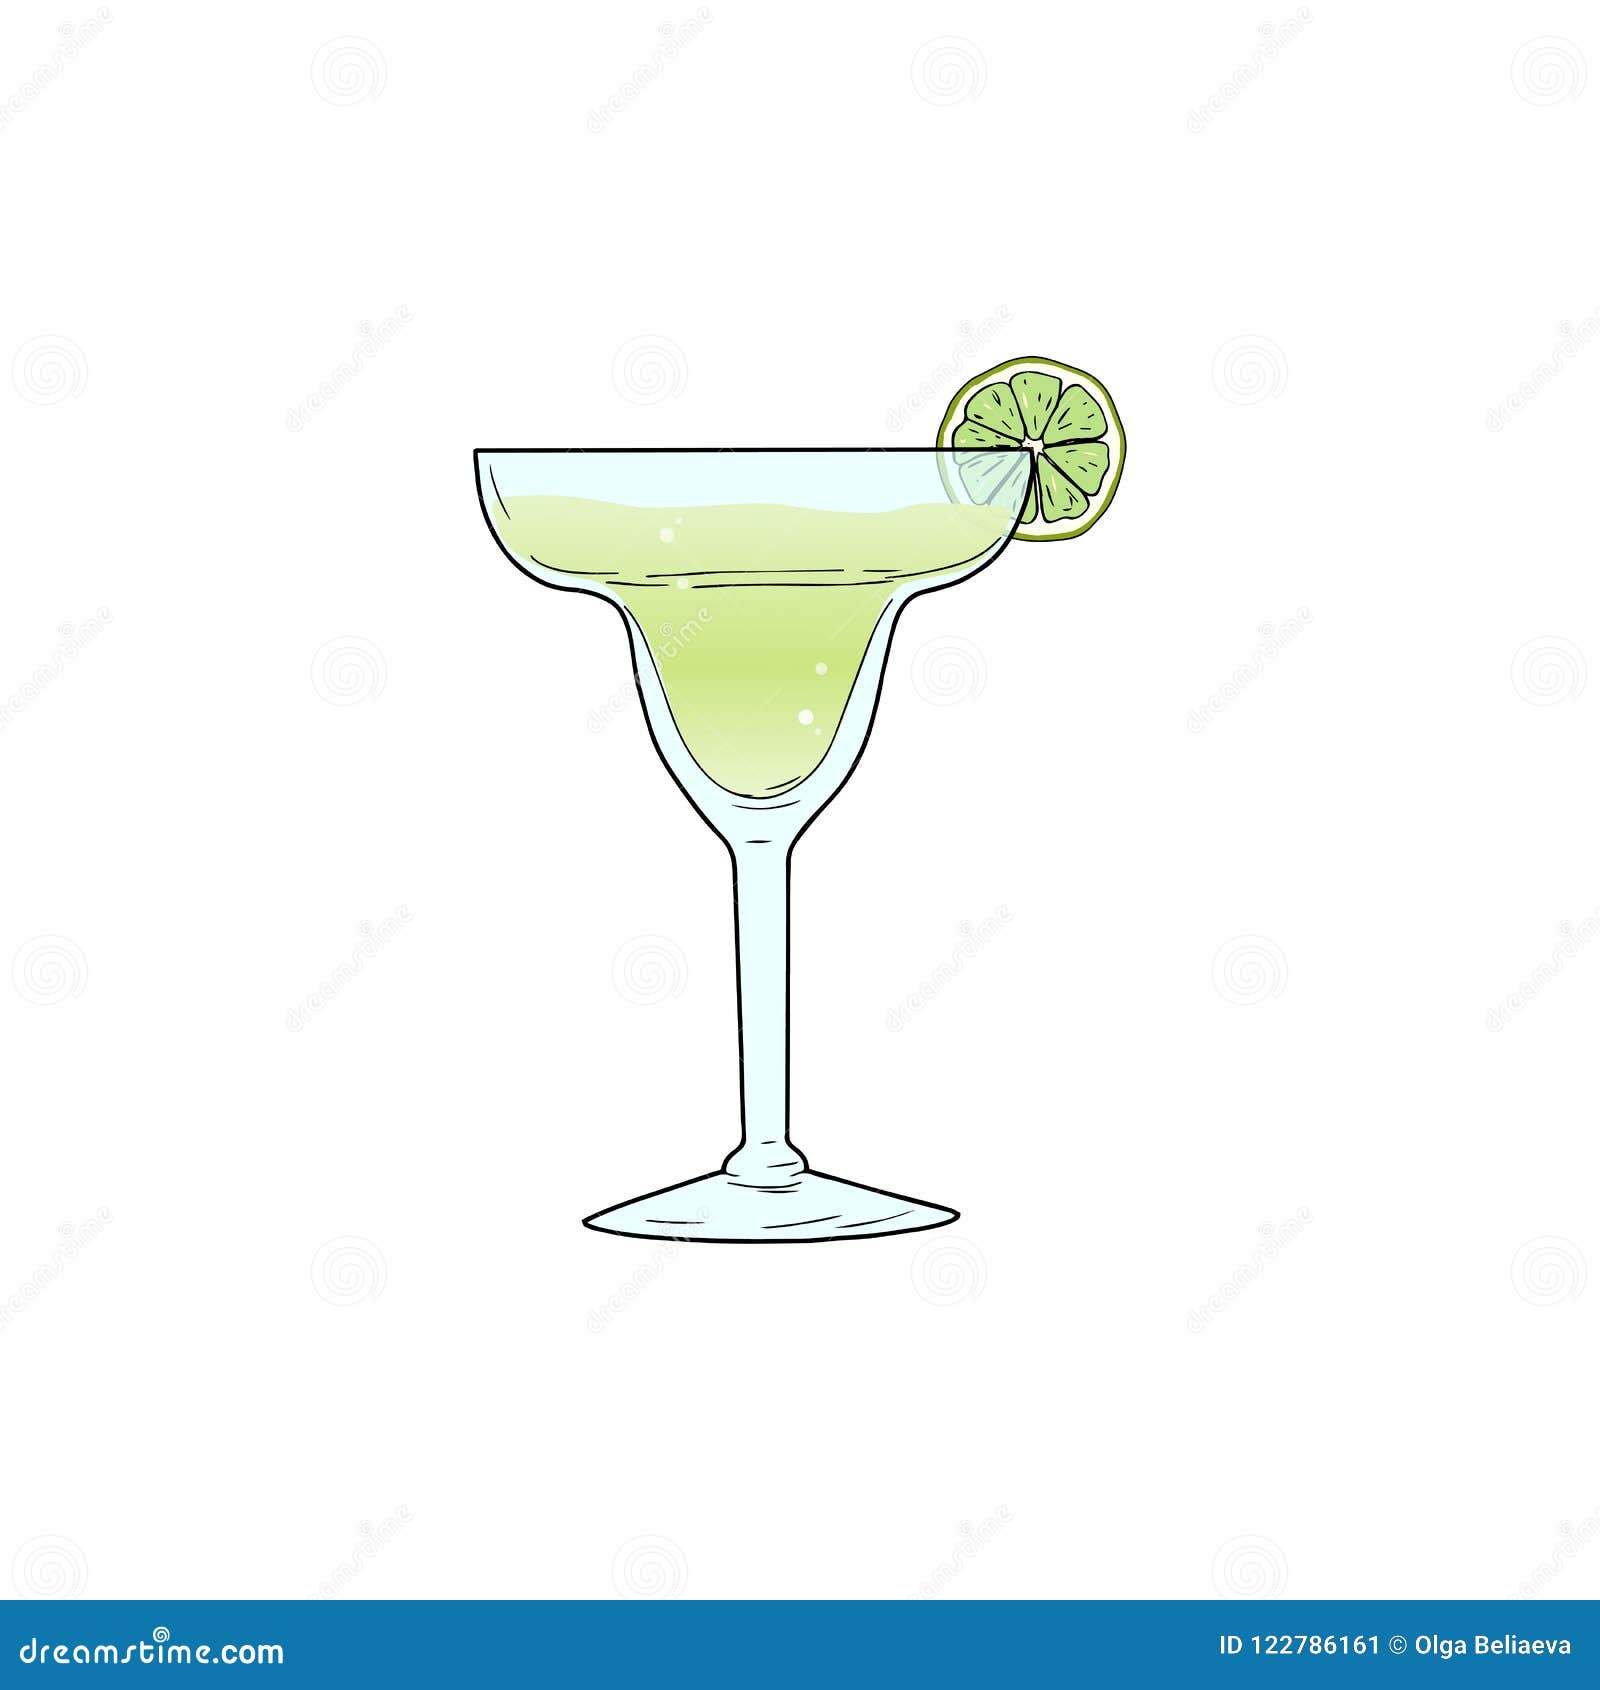 https://thumbs.dreamstime.com/z/margarita-alcoholic-cocktail-glass-lime-slice-vector-illustration-isolated-white-background-hand-sketched-composition-122786161.jpg